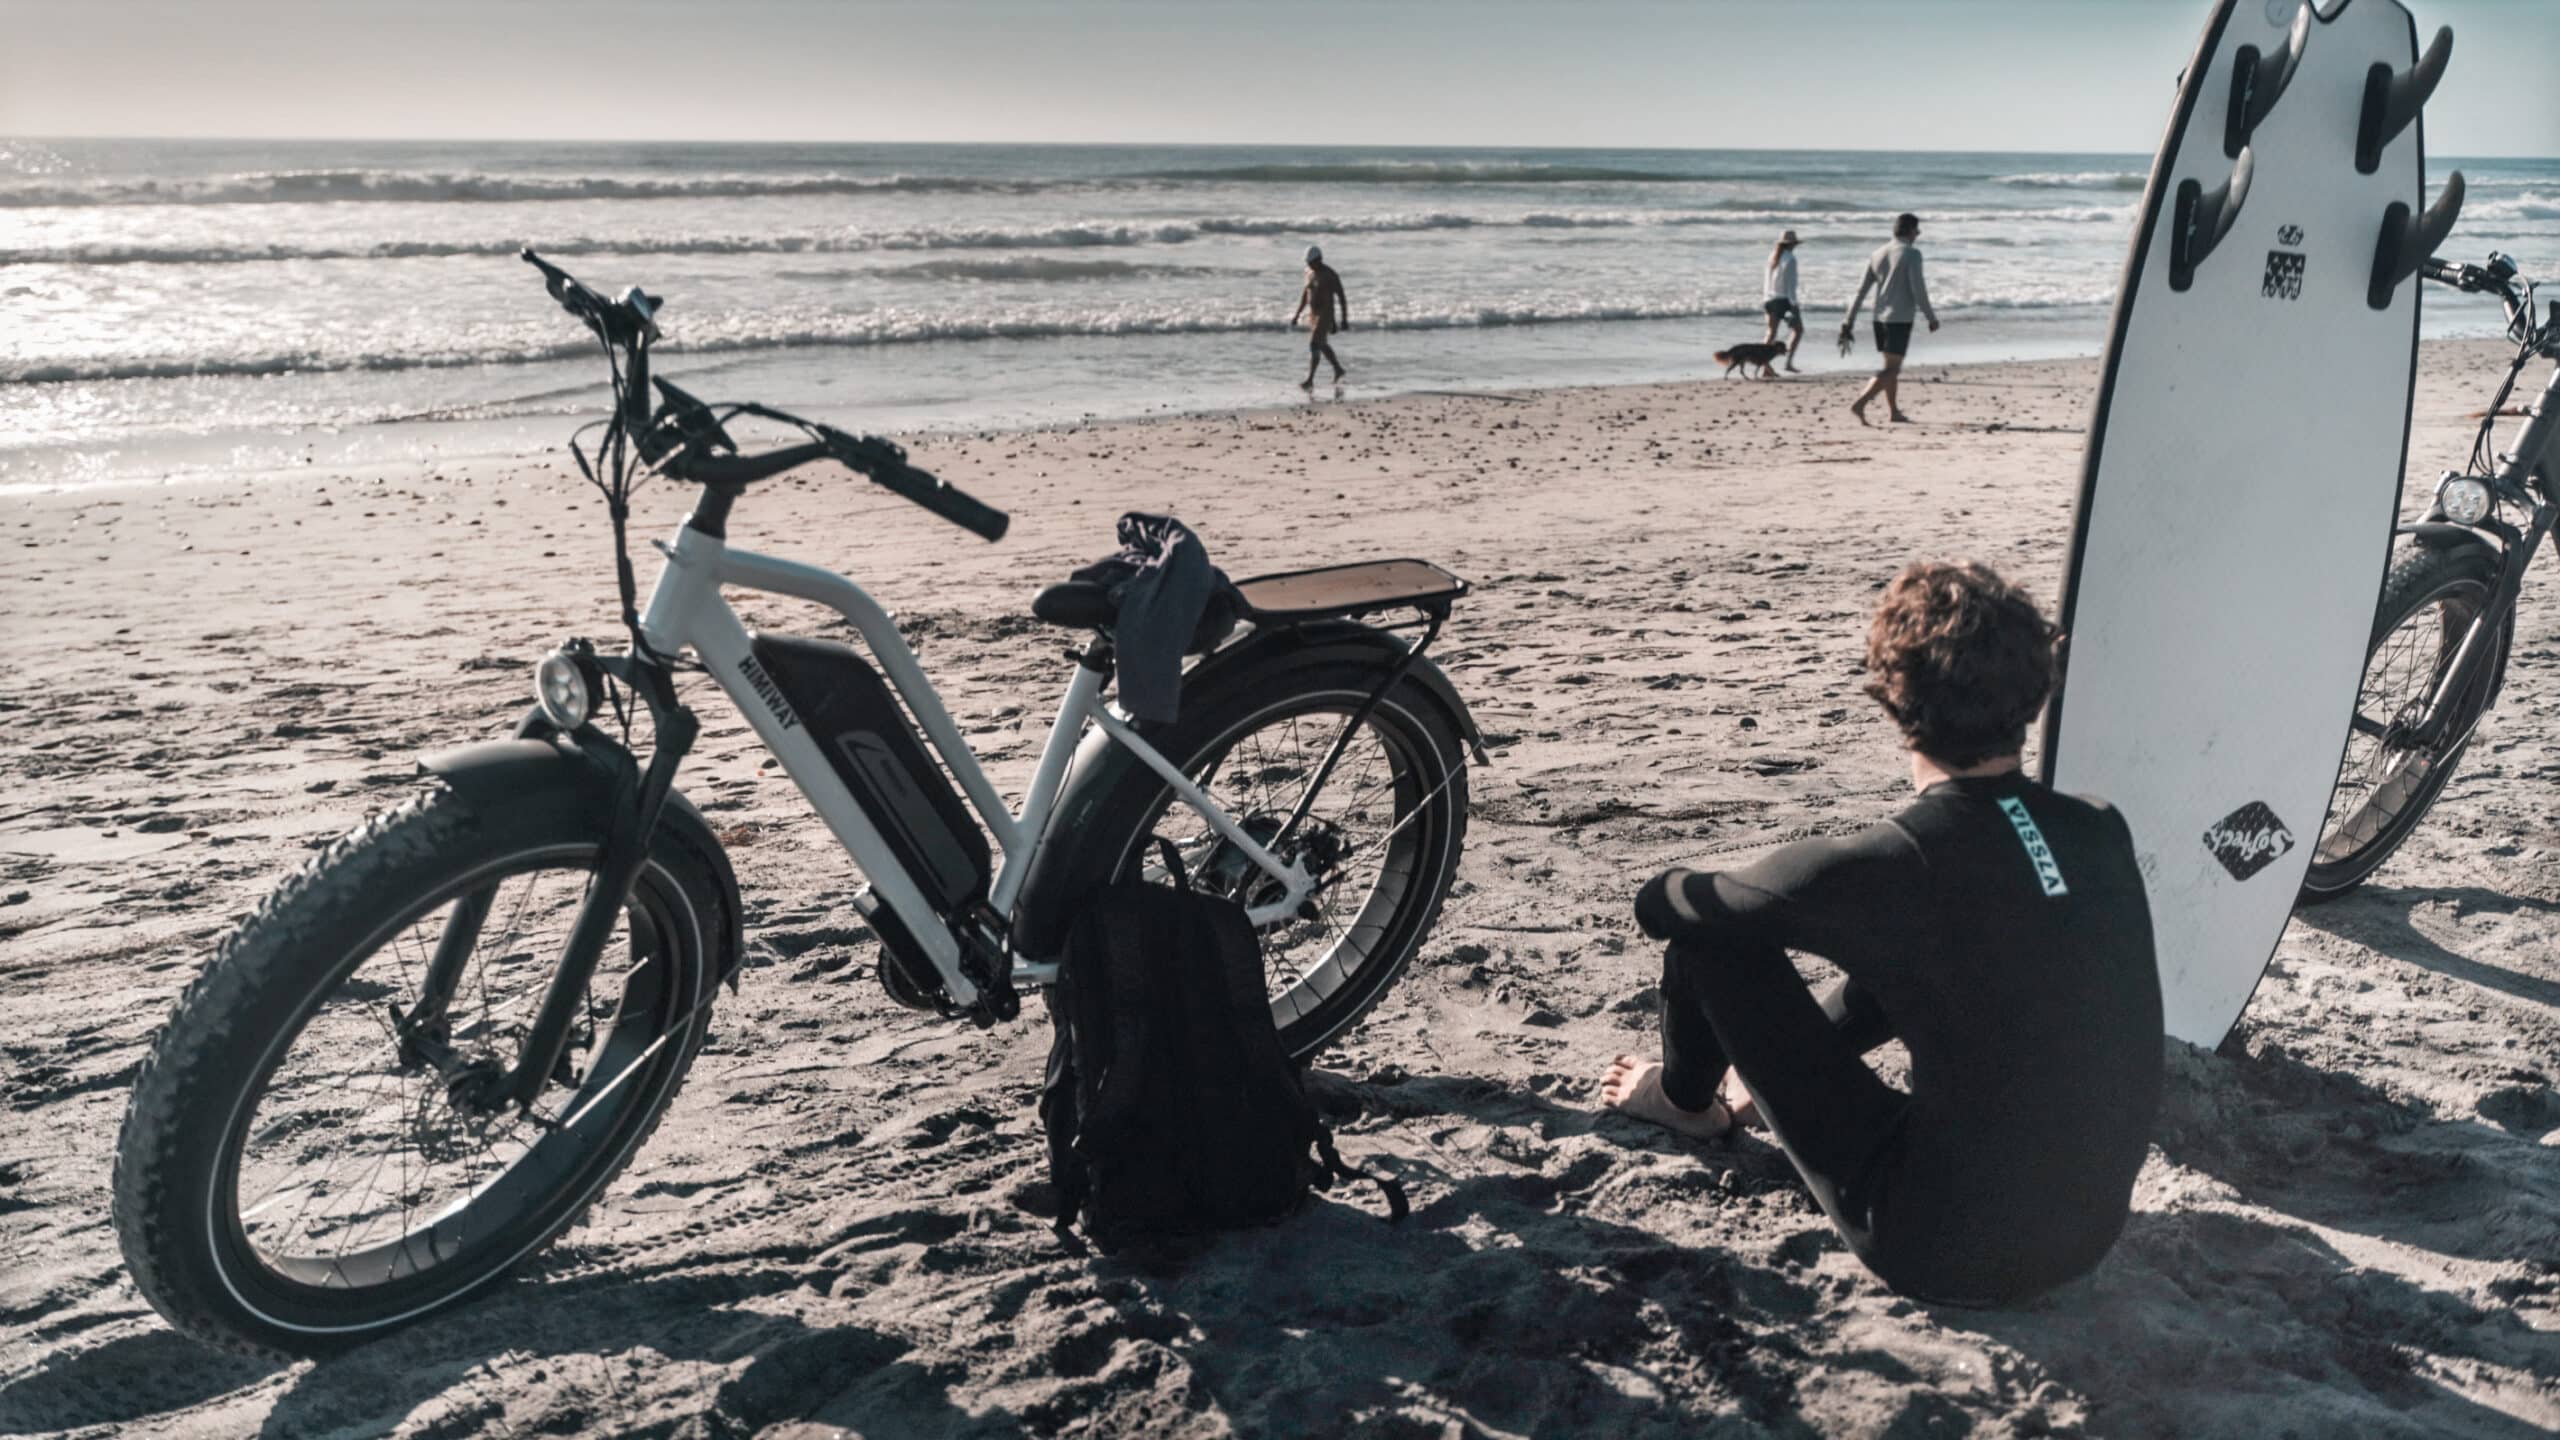 Himiway fat tire electric bike is on a beach with a surfer and a surfboard